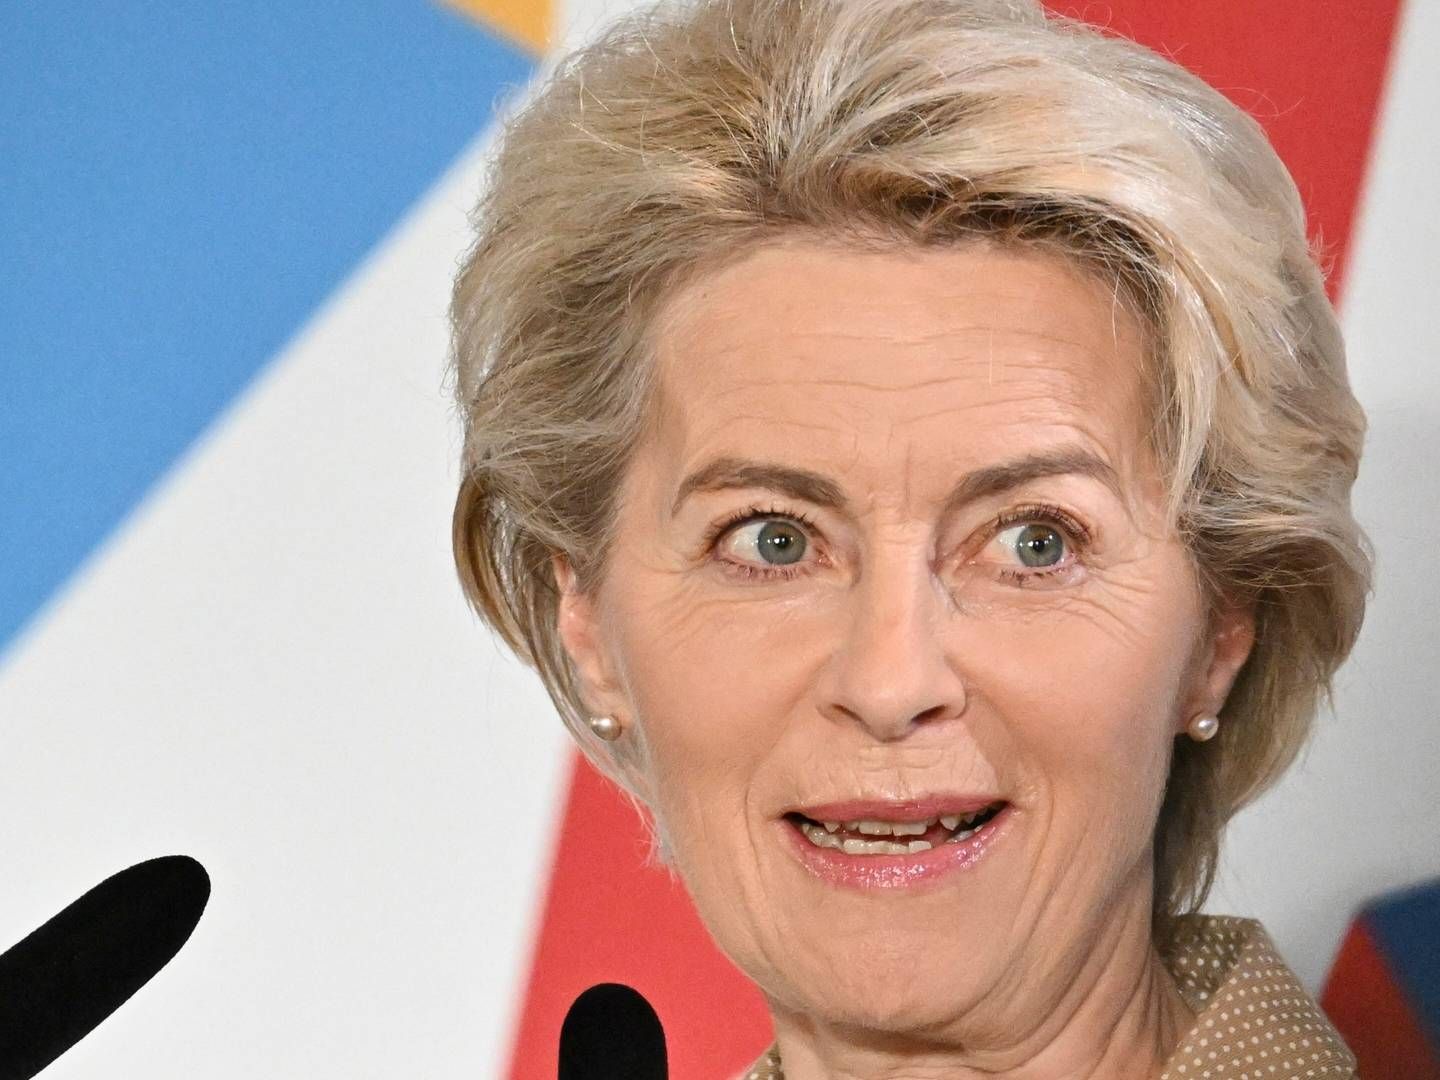 President of the EU Commission Ursula von der Leyen met with commissioners on a video call Sunday to discuss emergency measures to rein in gas prices. | Photo: Joe Klamar/AFP / AFP